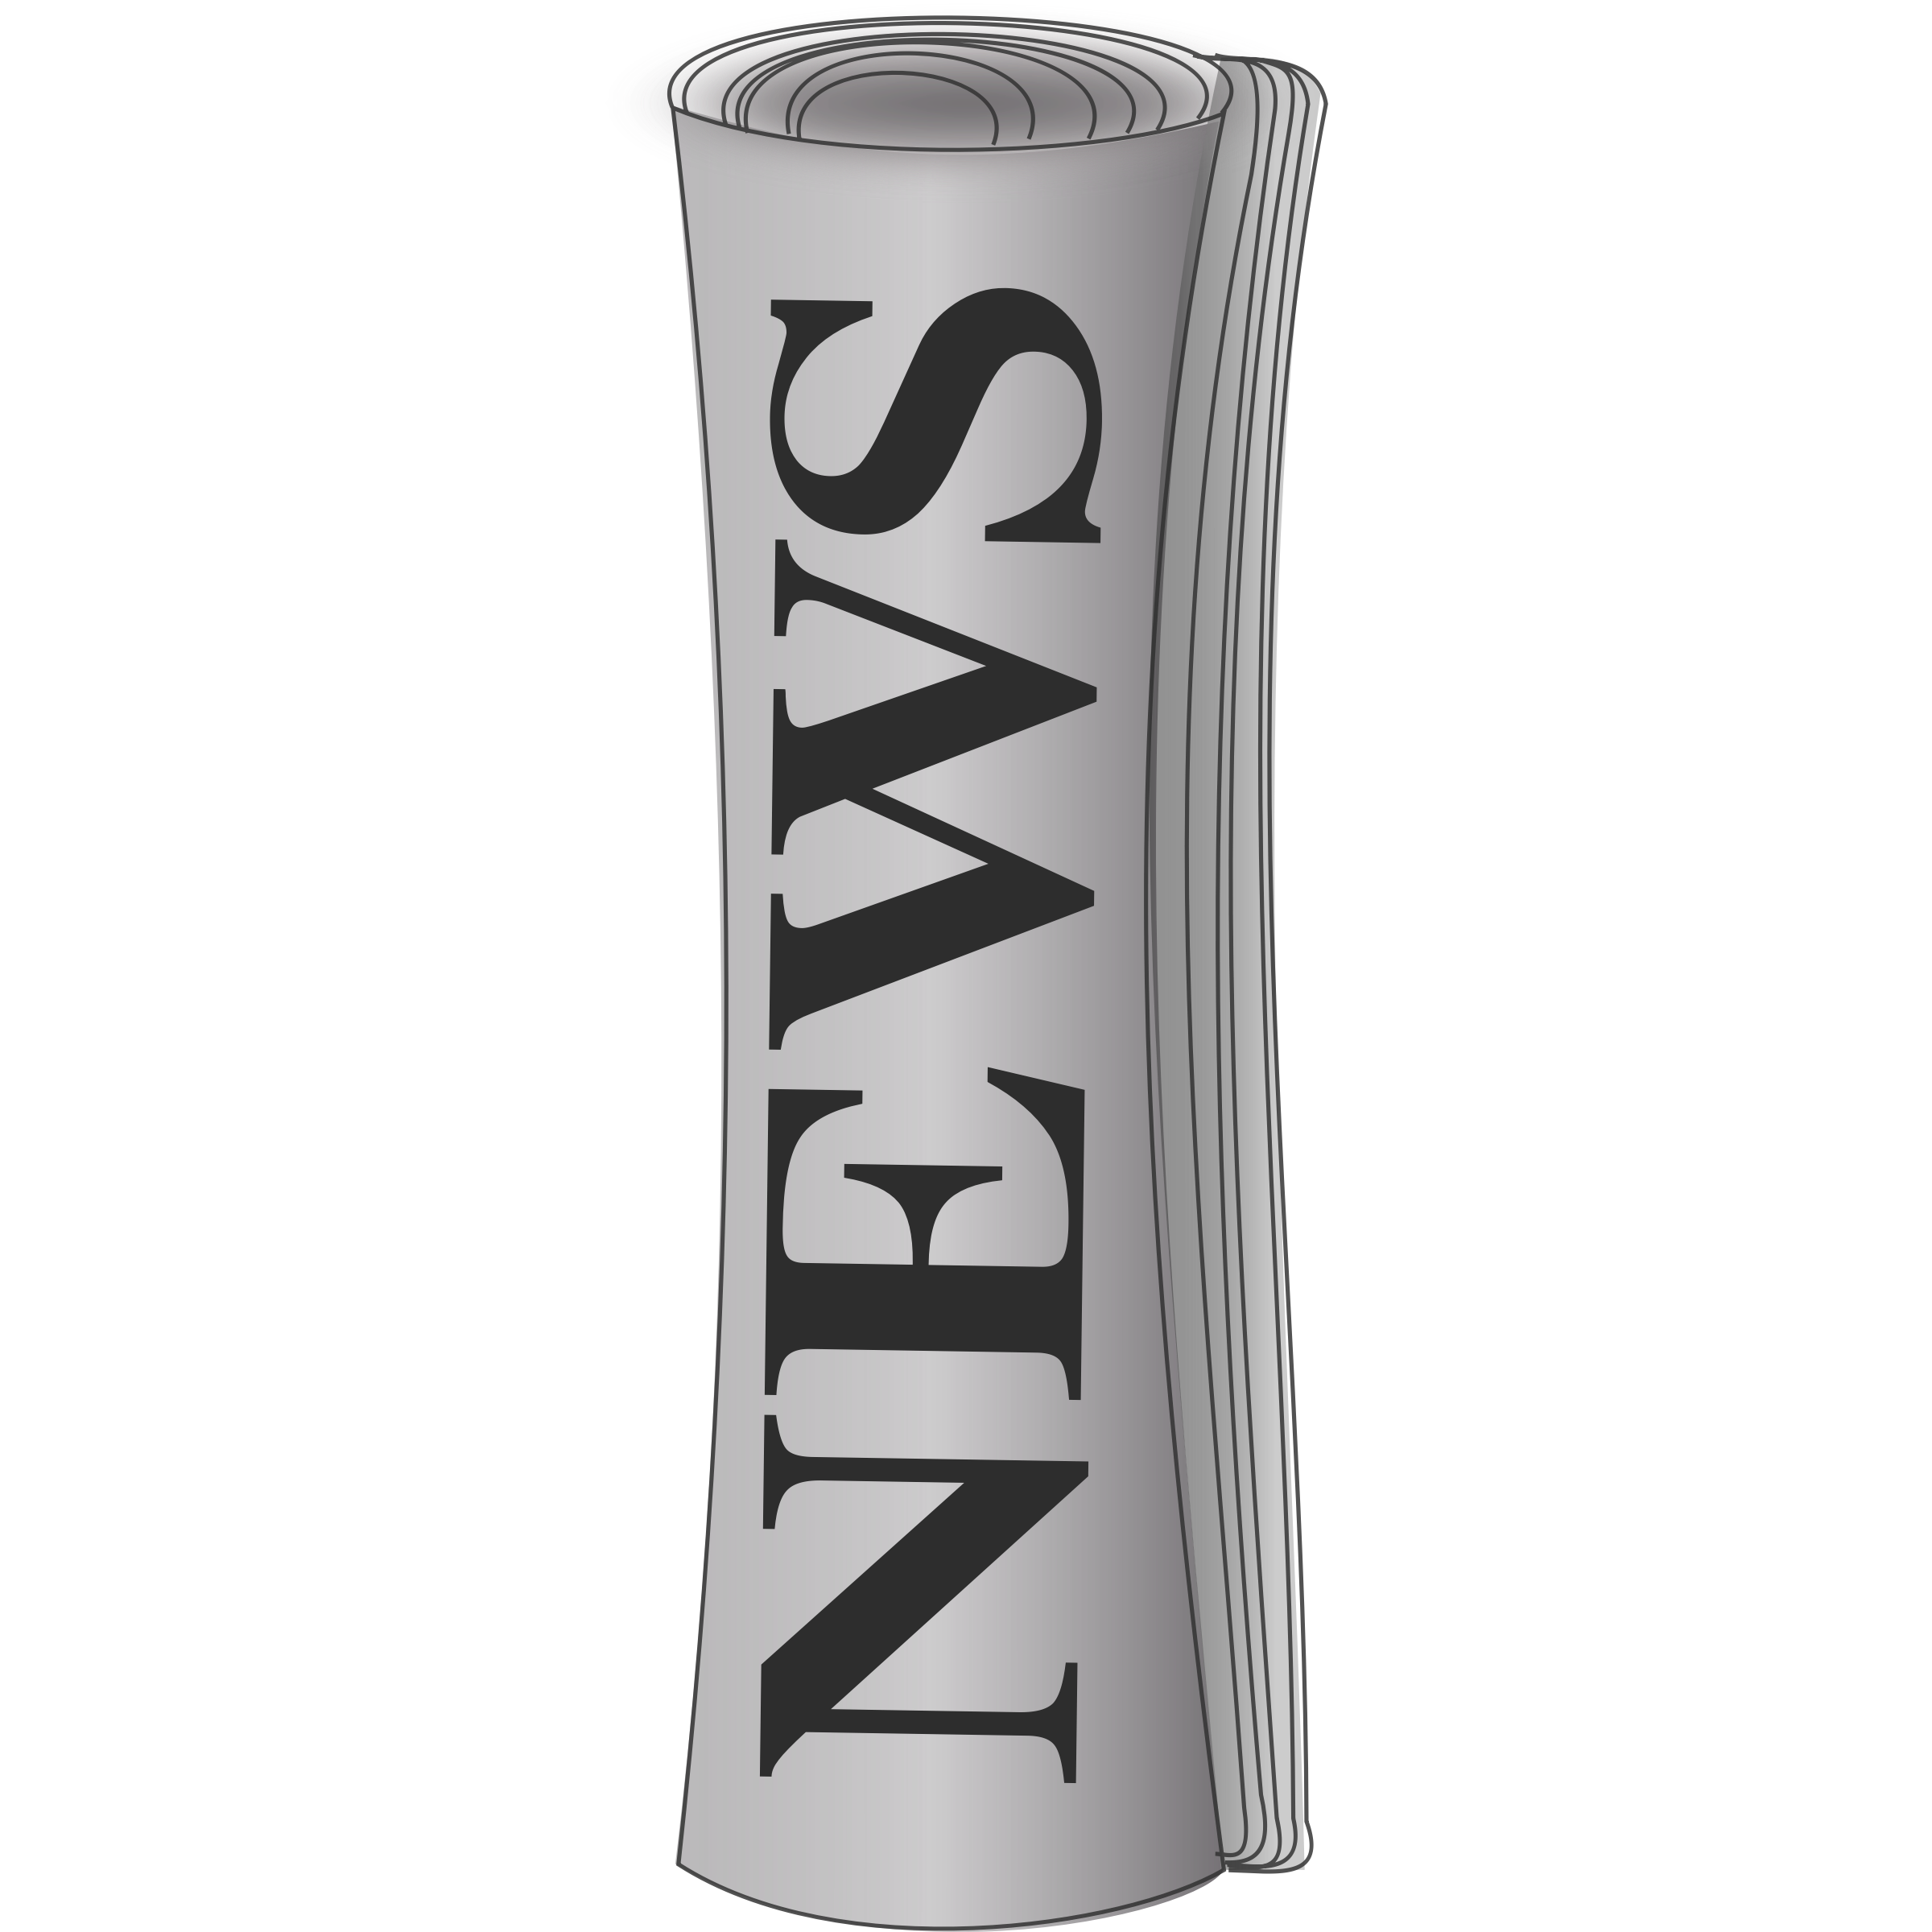 clipart image of newspaper - photo #35